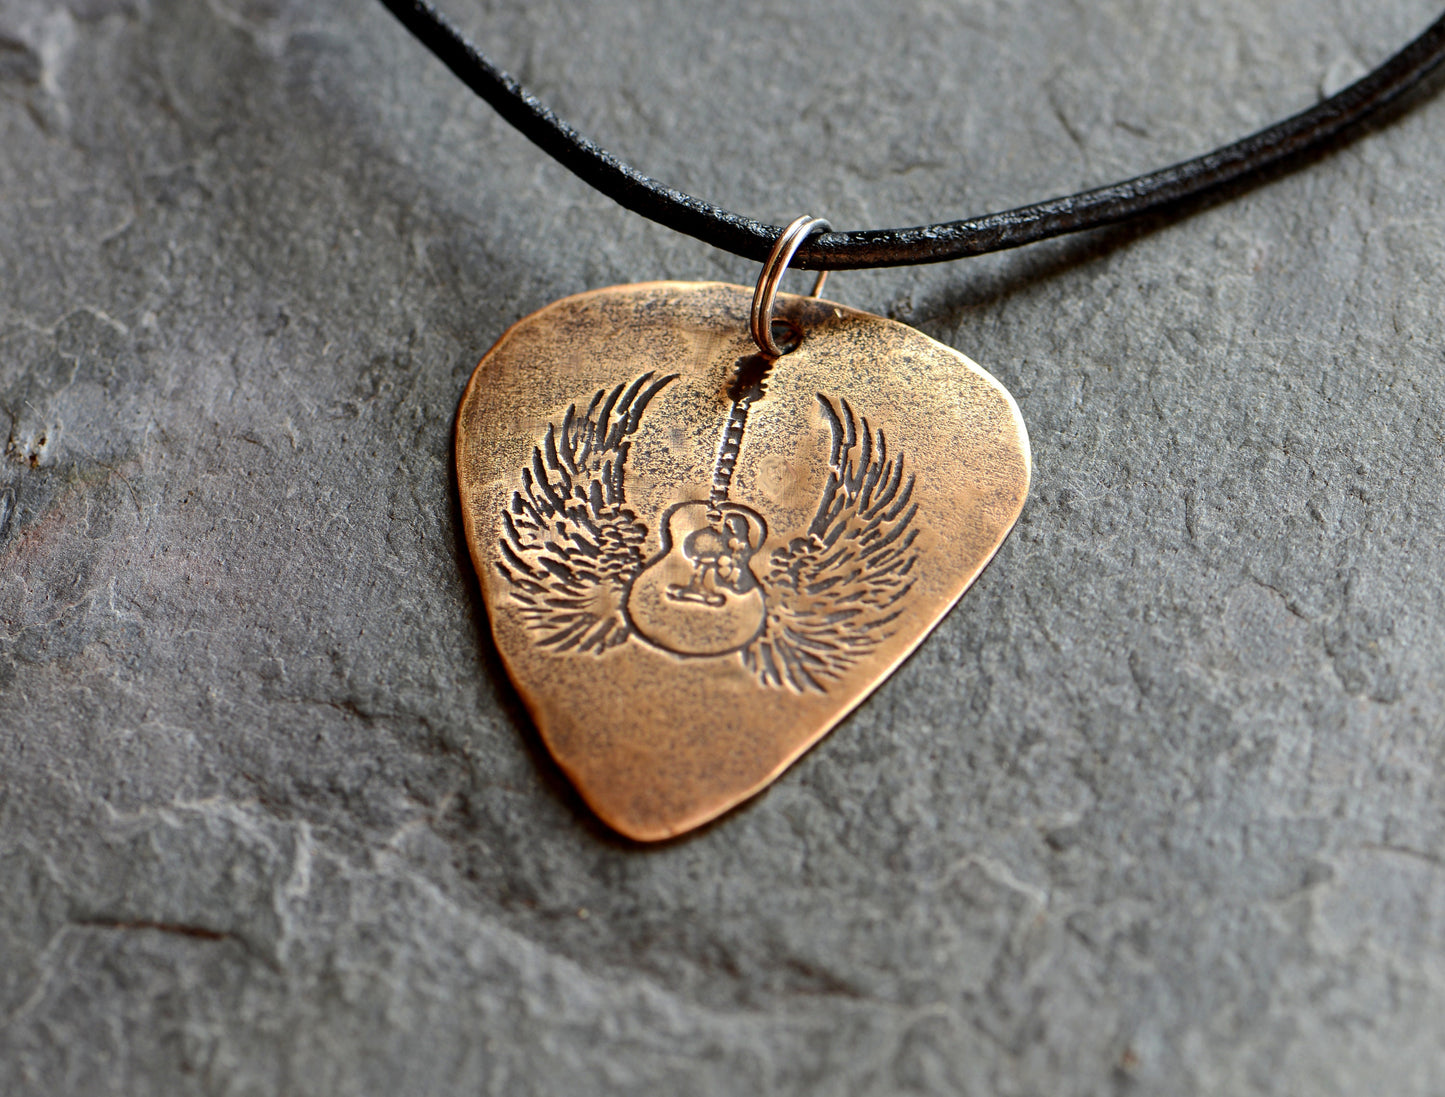 Winged guitar on bronze guitar pick necklace